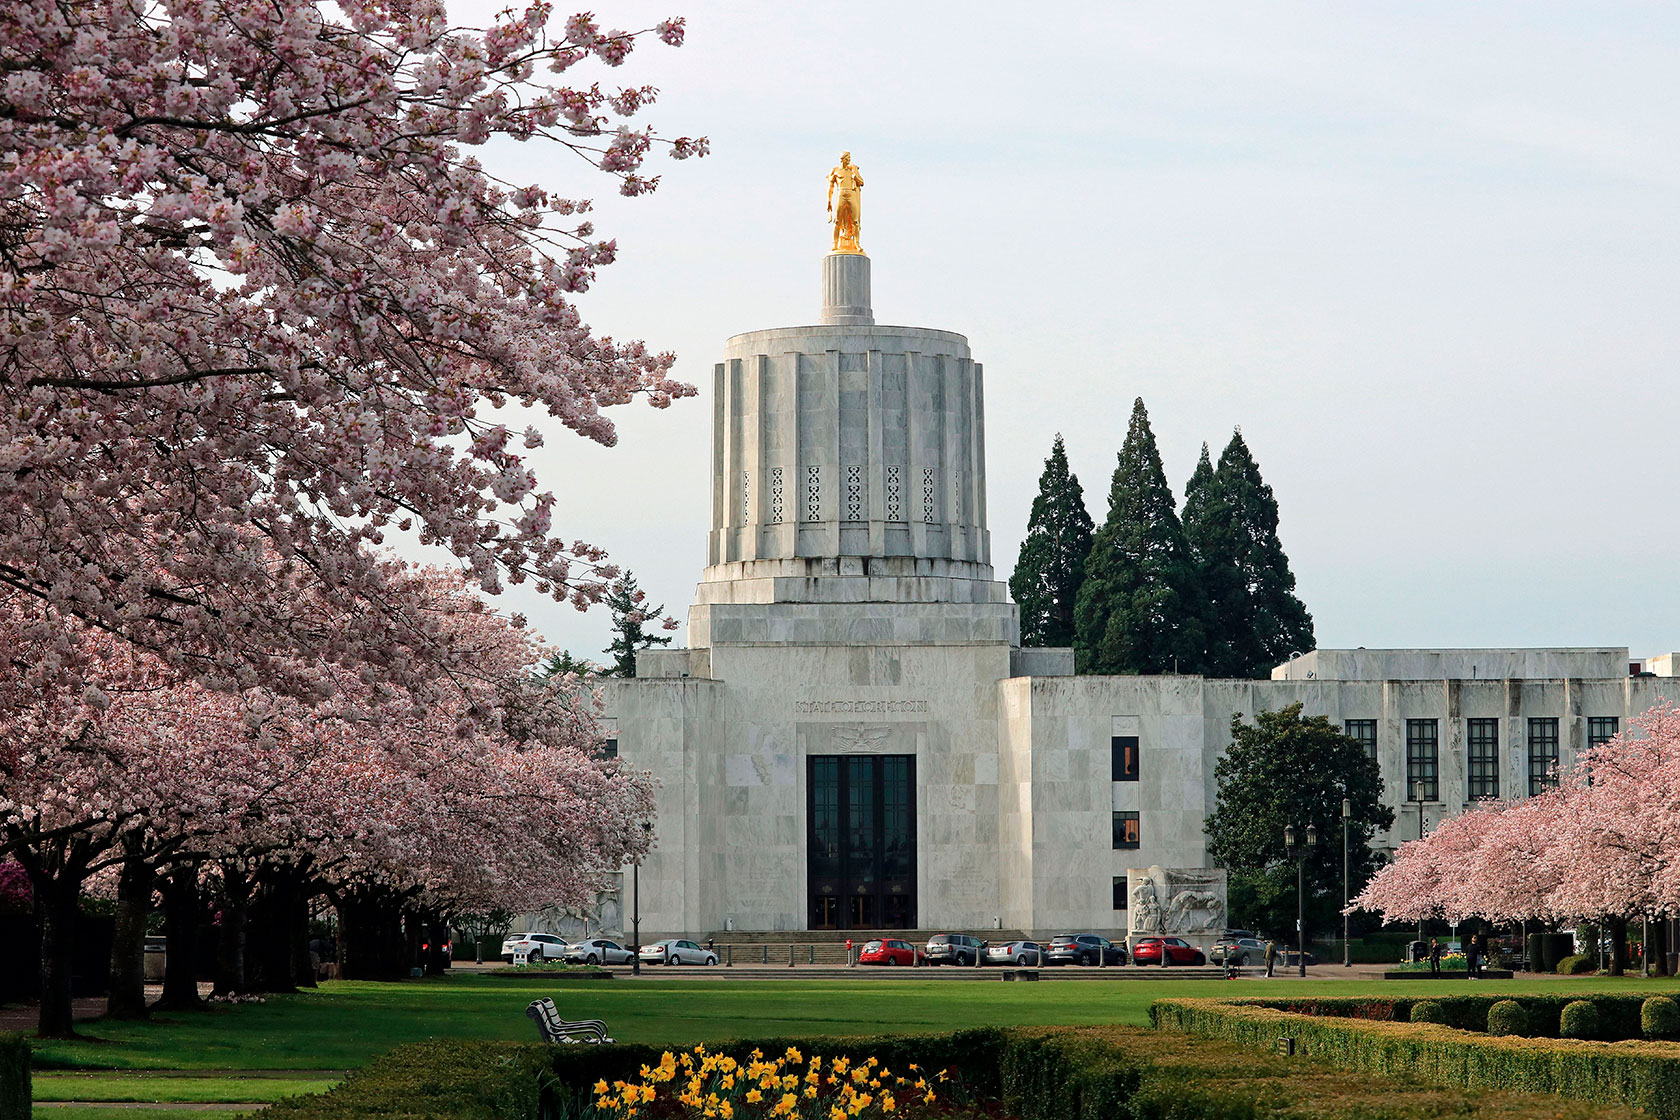 The Oregon Capitol building is seen behind cherry blossom trees